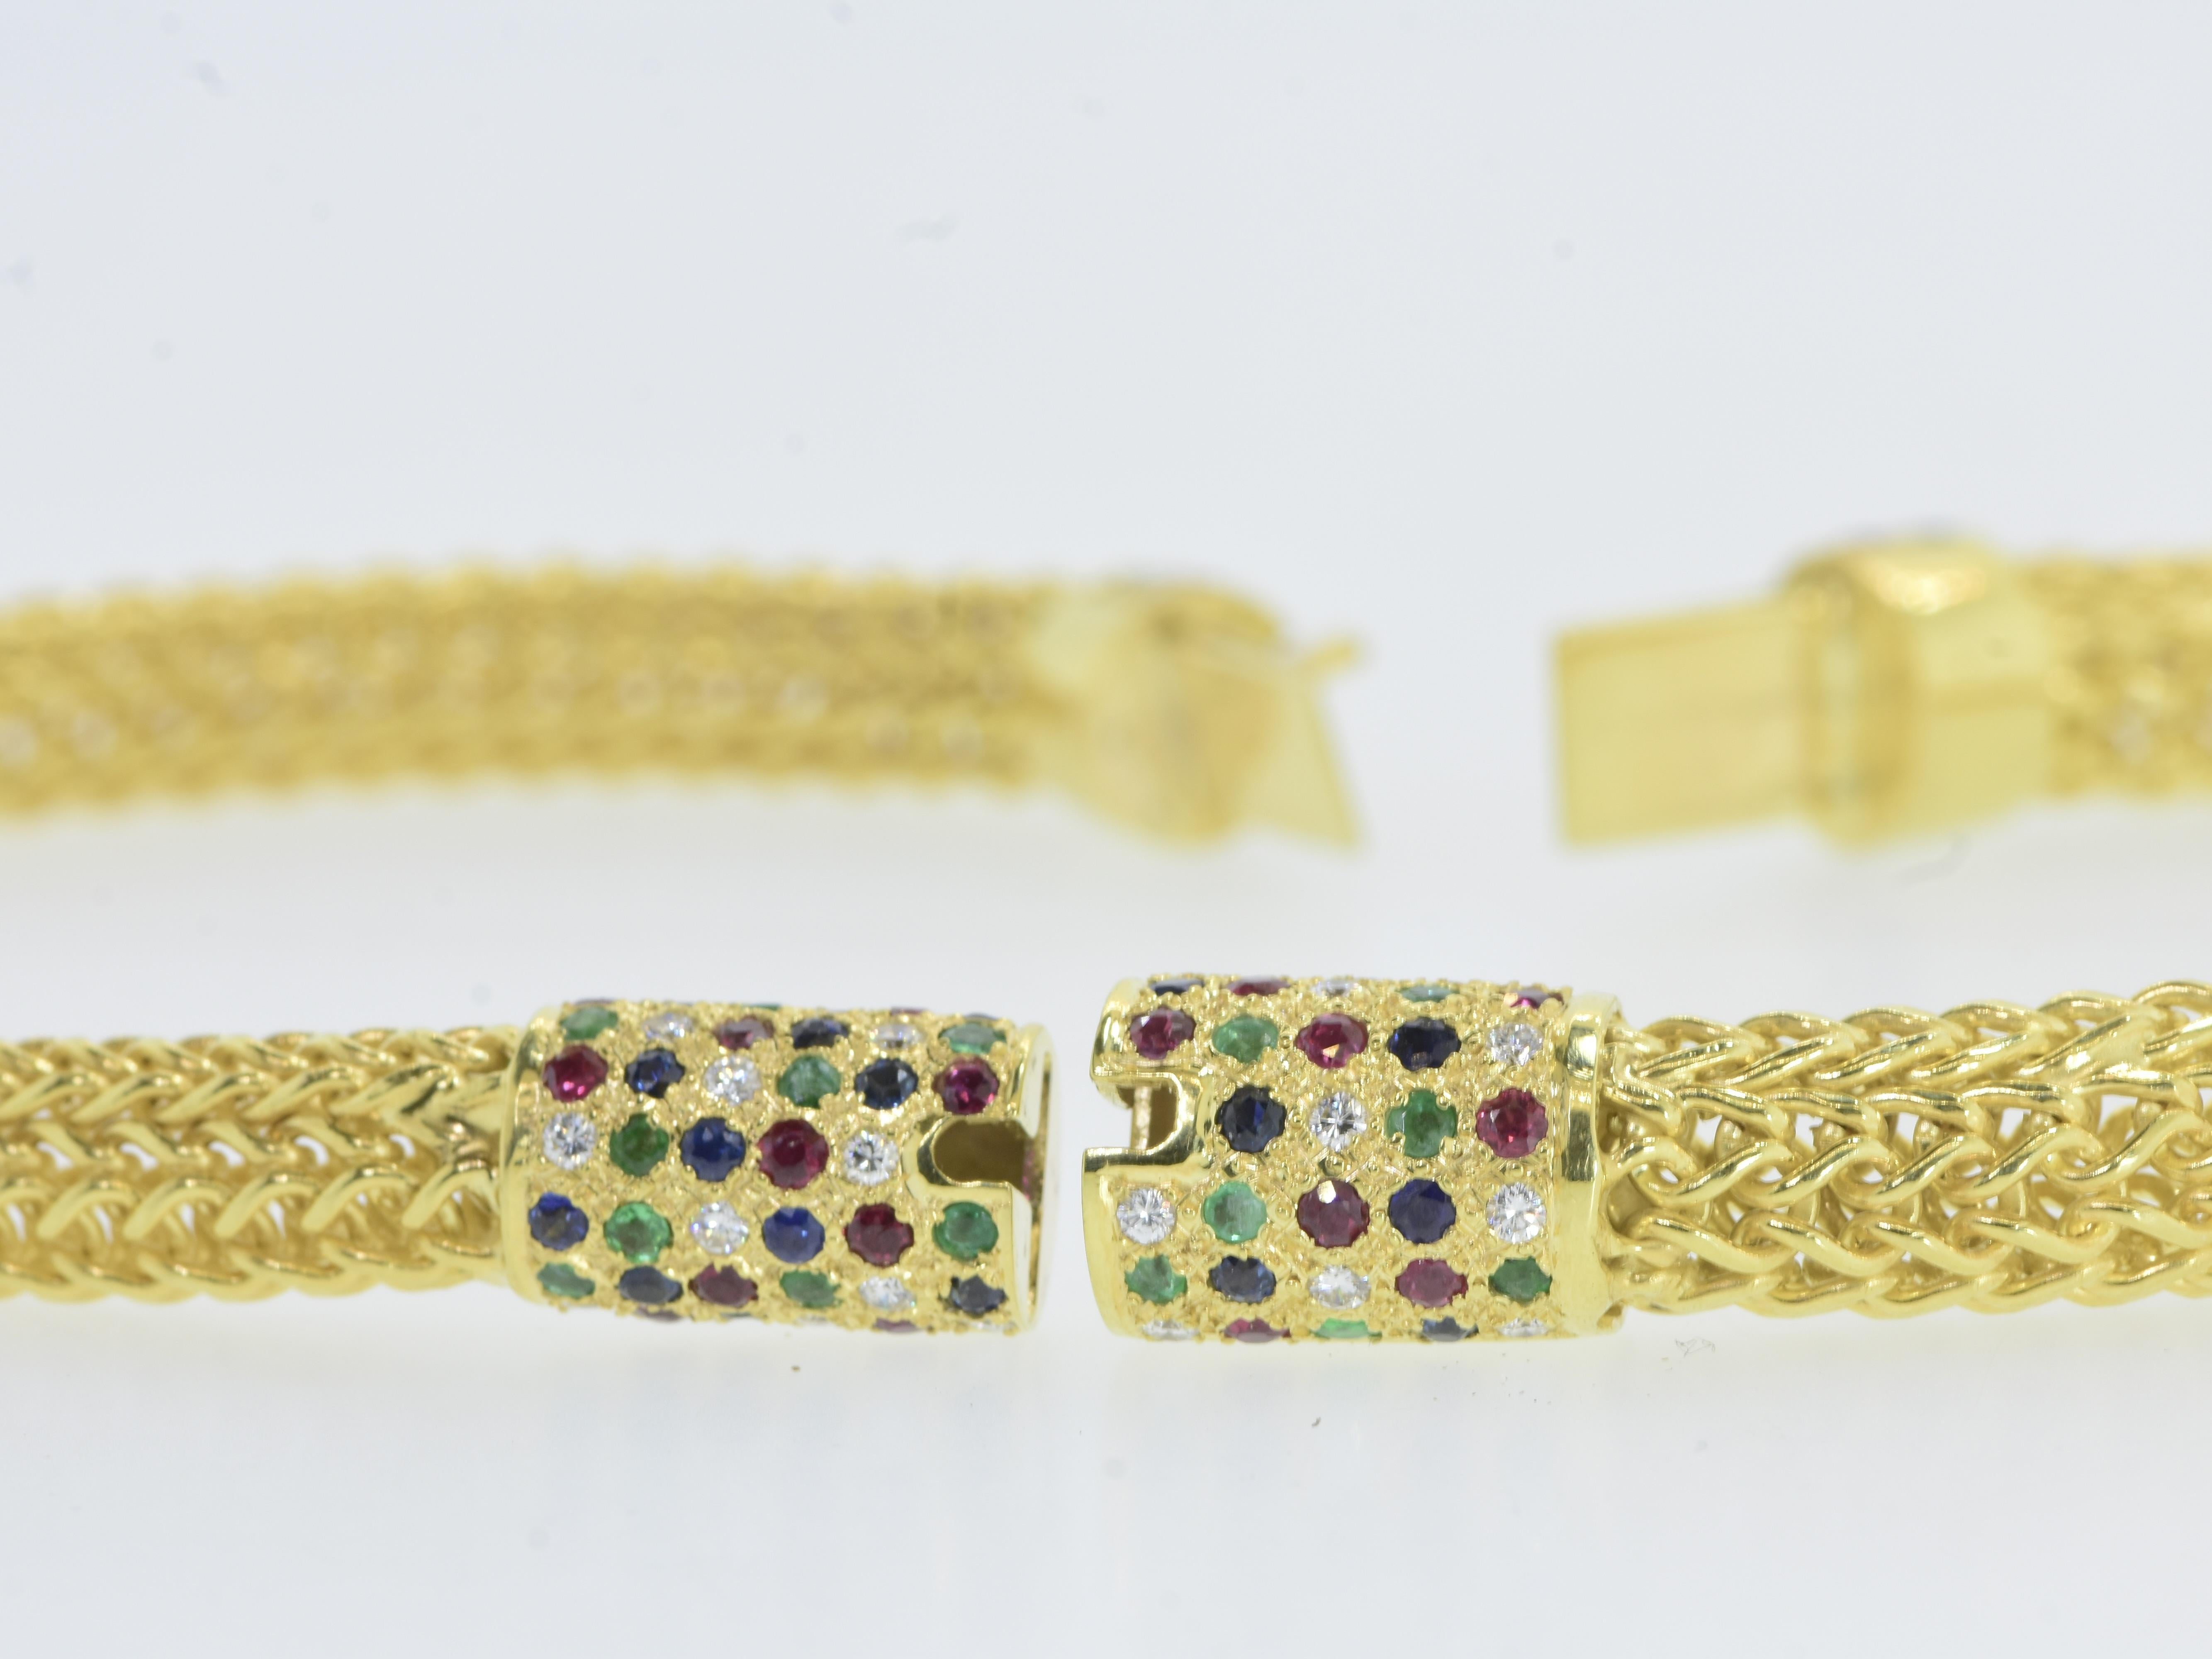 Yellow Gold, Diamond, Sapphire, Ruby & Emerald Pair of Vintage Bracelets c 1960s For Sale 5